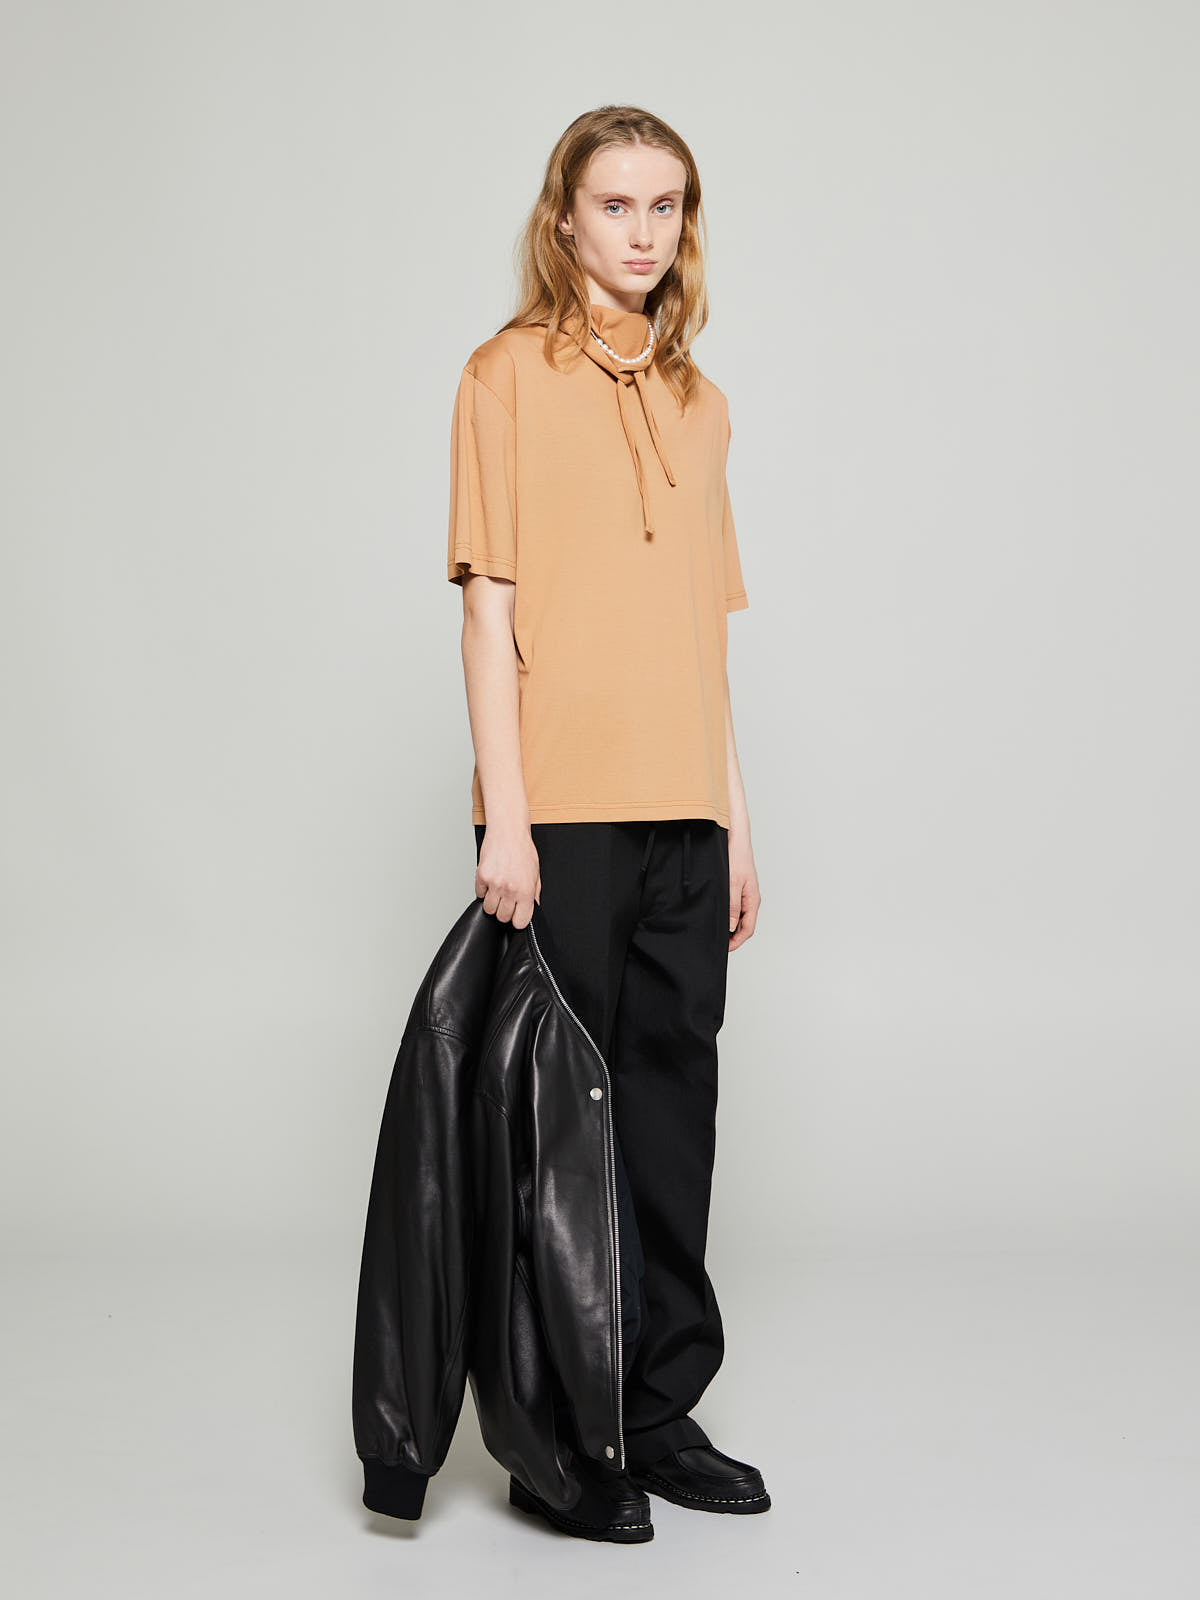 T-Shirt With Foulard in Burnt Sand